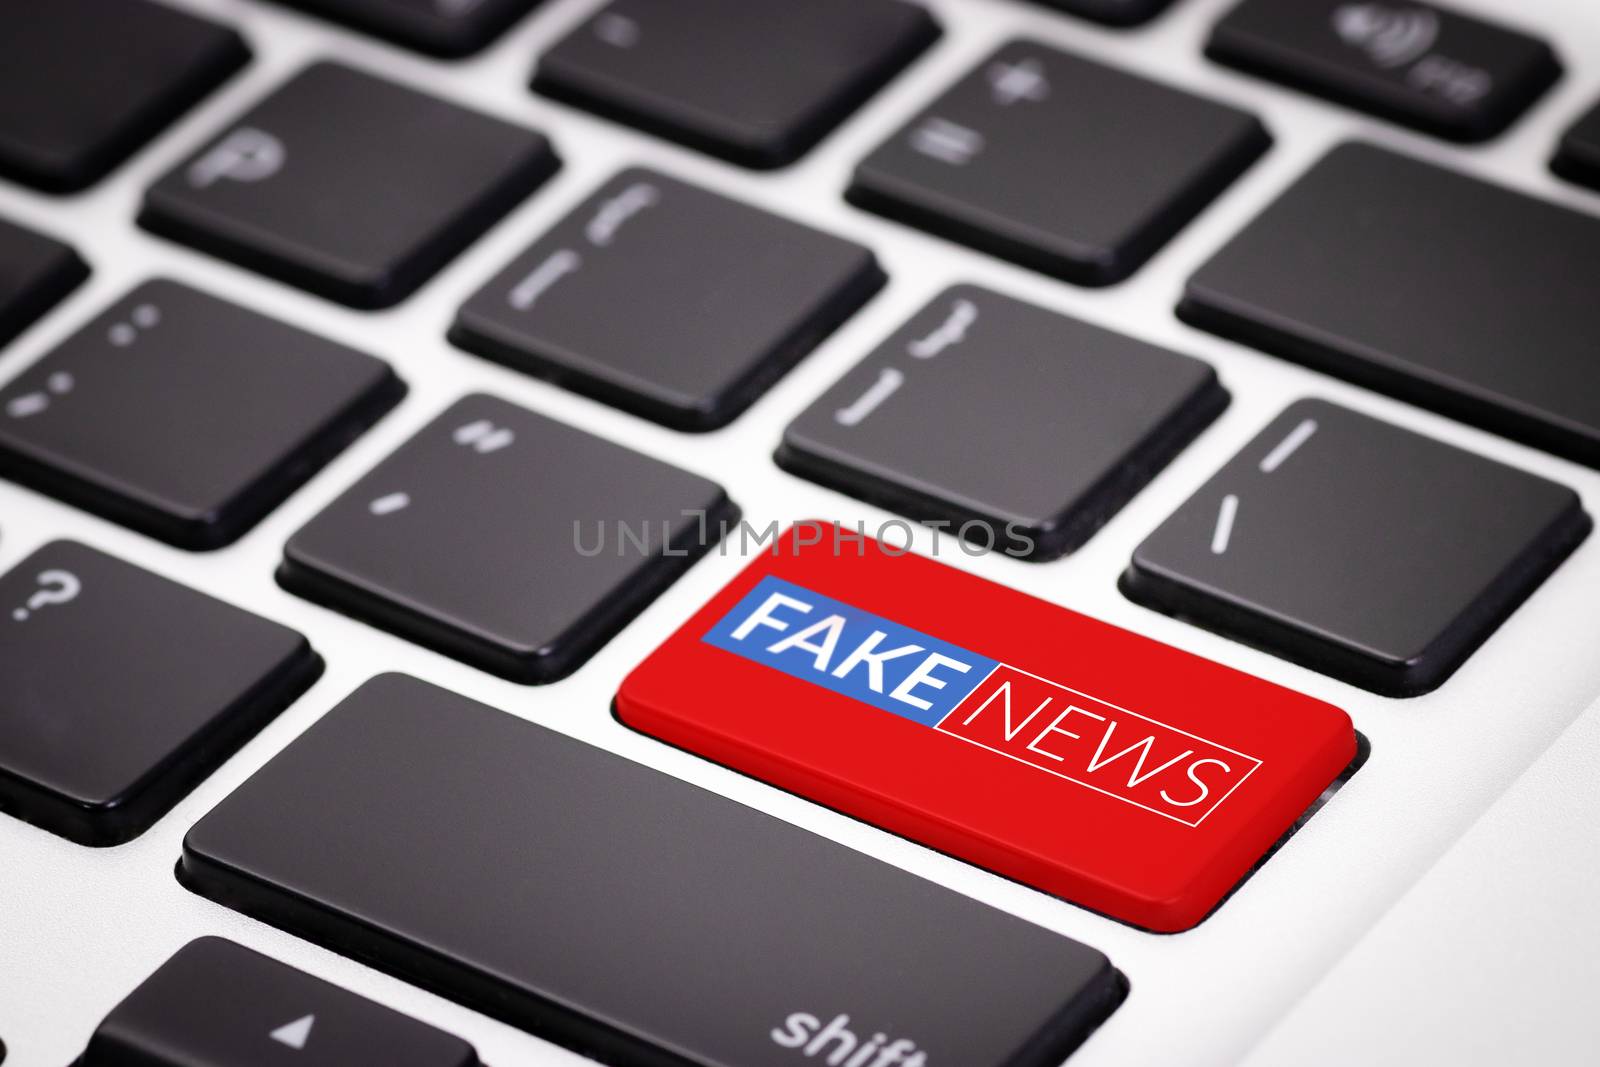 red fake news button on laptop keyboard. fake news on internet in modern digital age concept by asiandelight